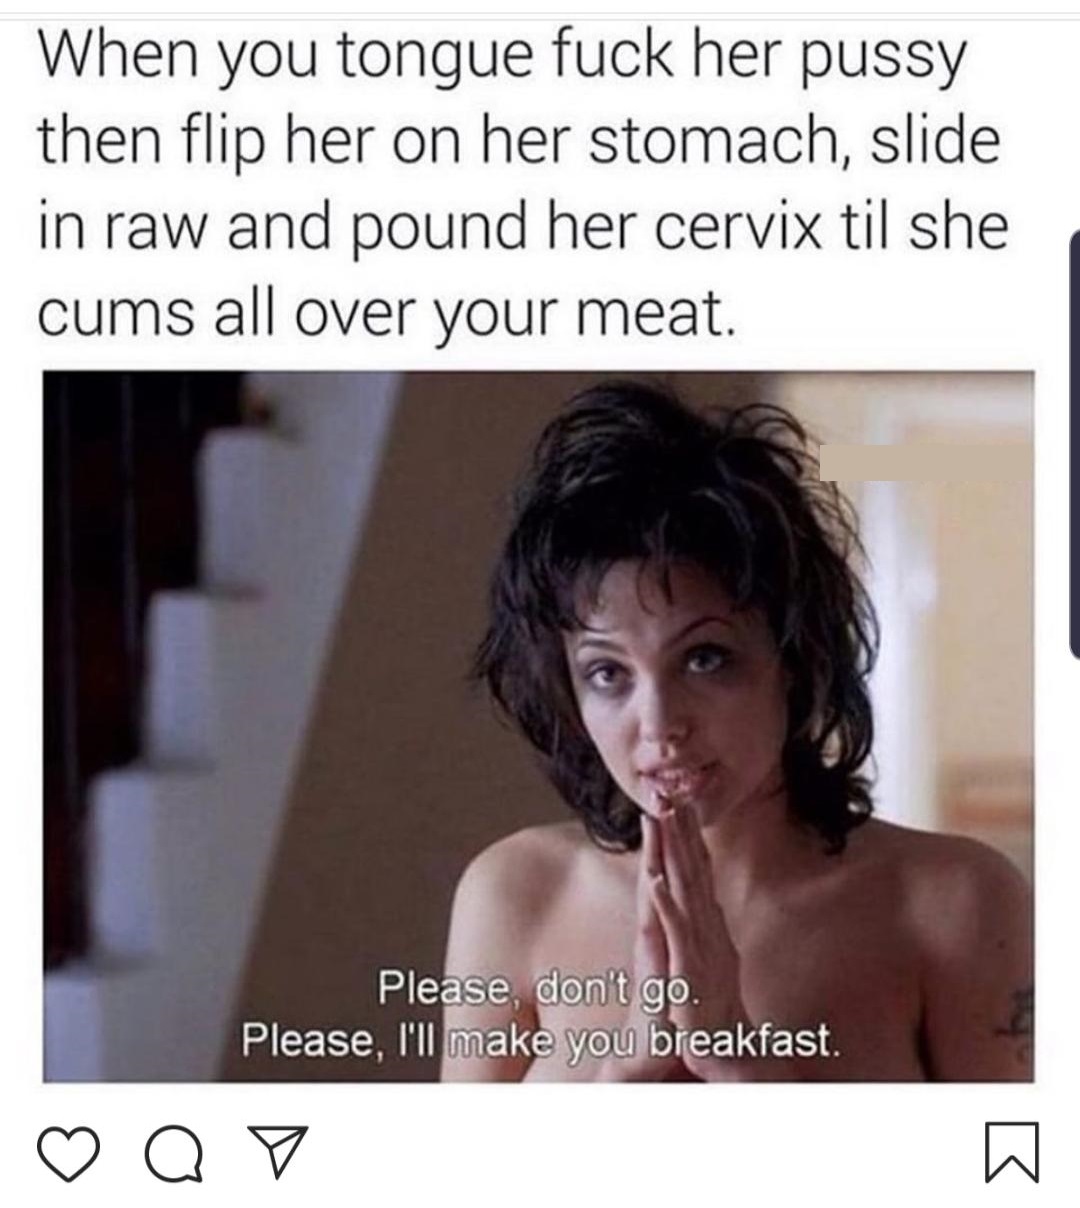 pound her cervix - When you tongue fuck her pussy then flip her on her stomach, slide in raw and pound her cervix til she cums all over your meat. Please, don't go. Please, I'll make you breakfast.